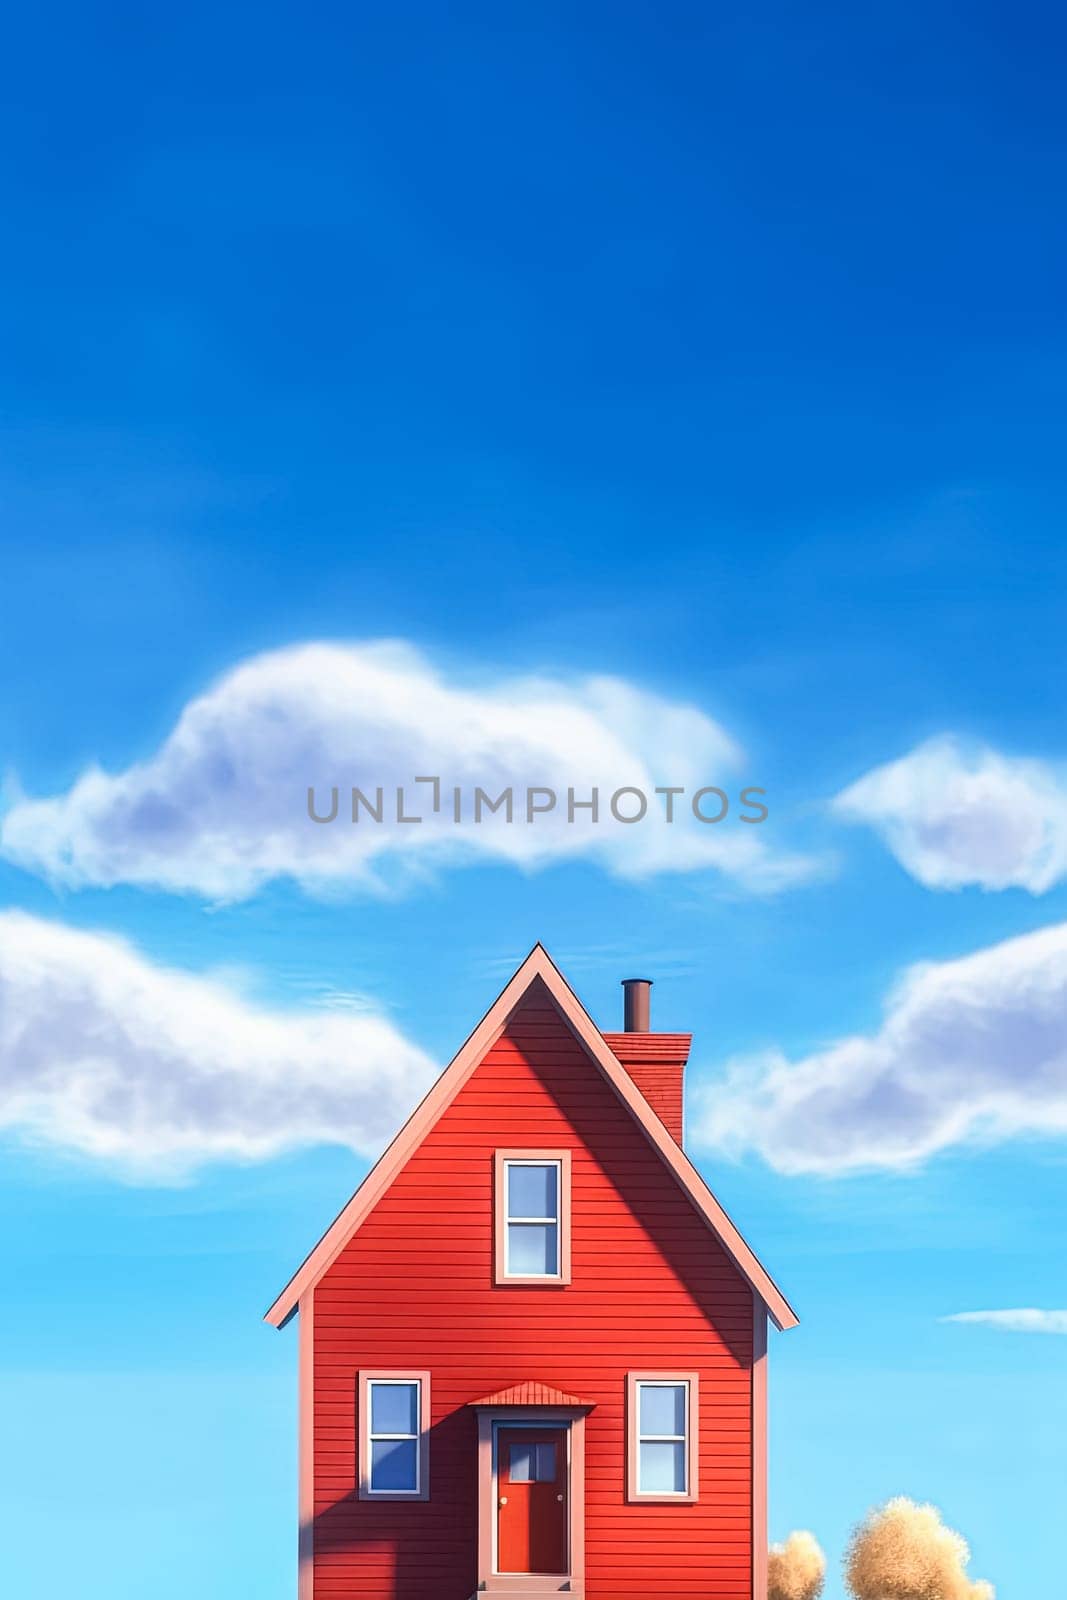 A small red house with a white trim sits in front of a blue sky. The house is the only building in the scene, and it is a single-story structure